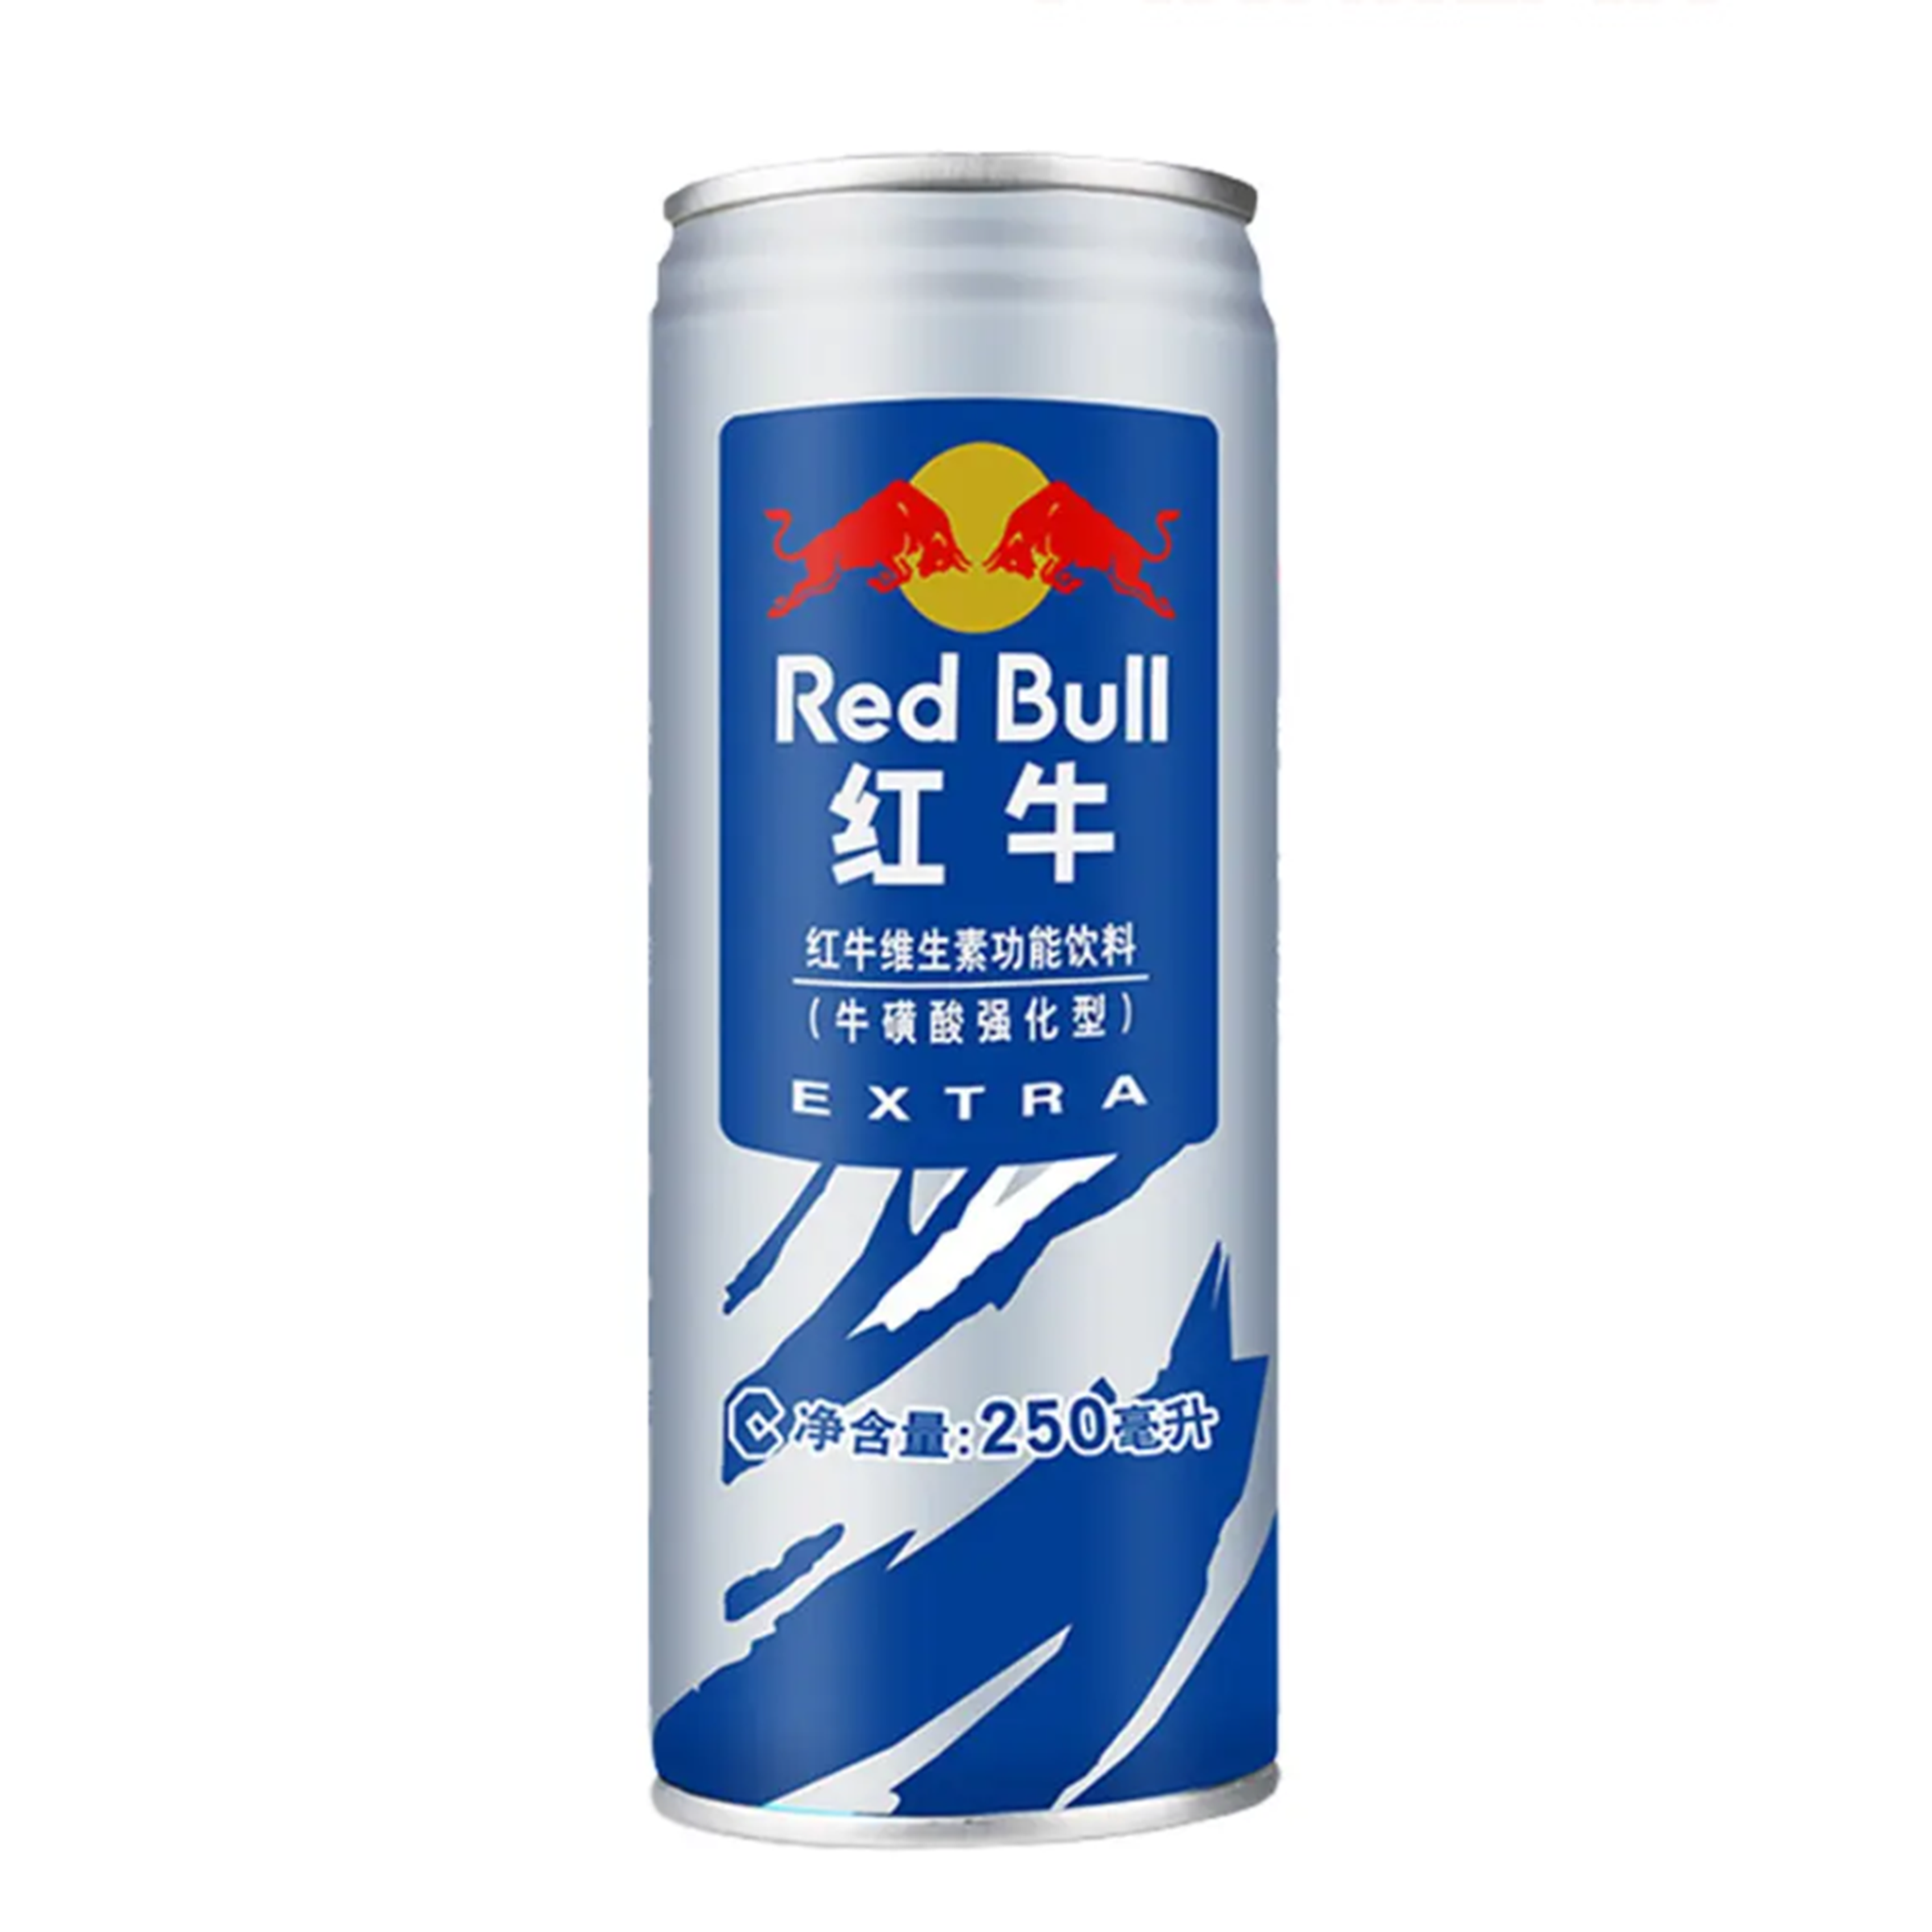 Red Bull - Extra (Asia)